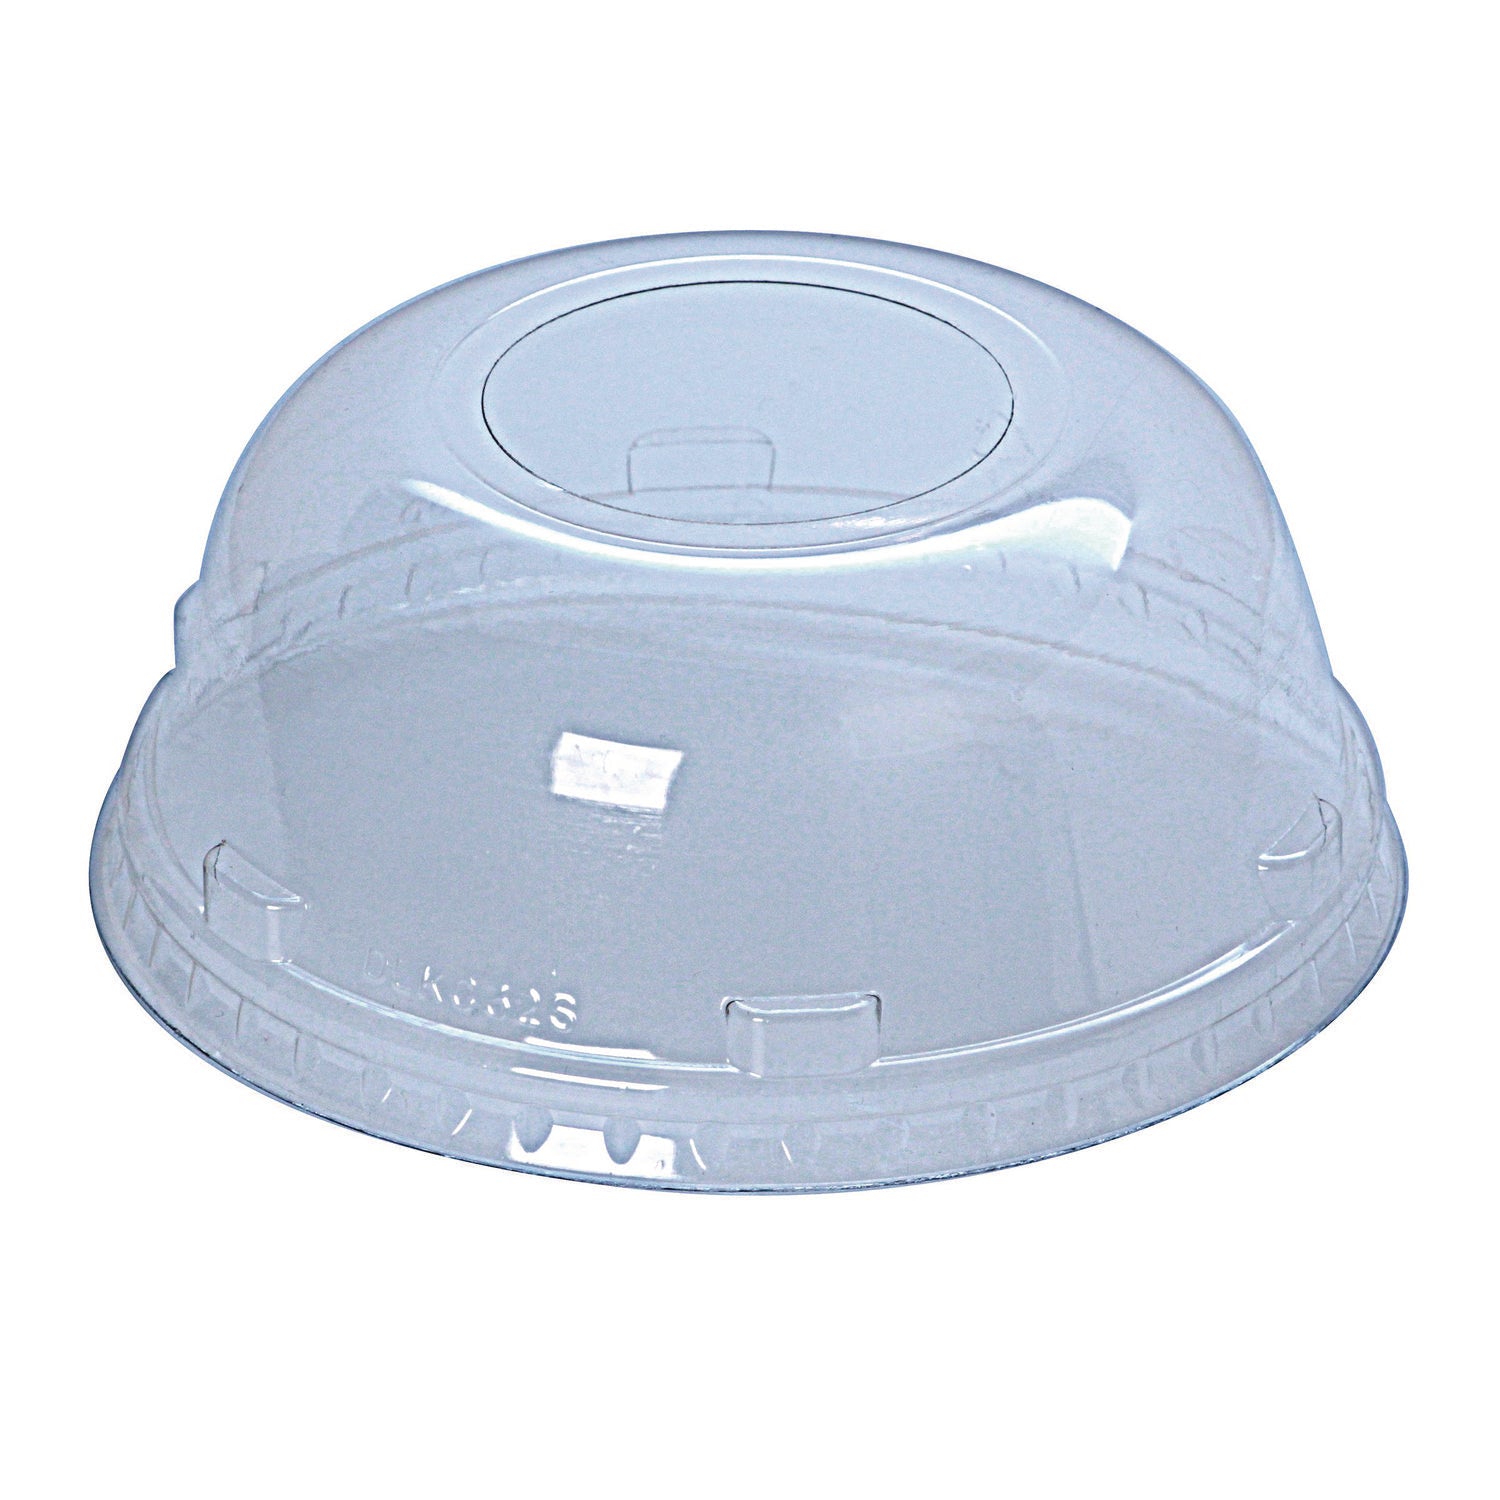 kal-clear-nexclear-drink-cup-lids-dome-lid-fits-32-oz-cold-cups-clear-500-carton_fabdlkc32s - 1